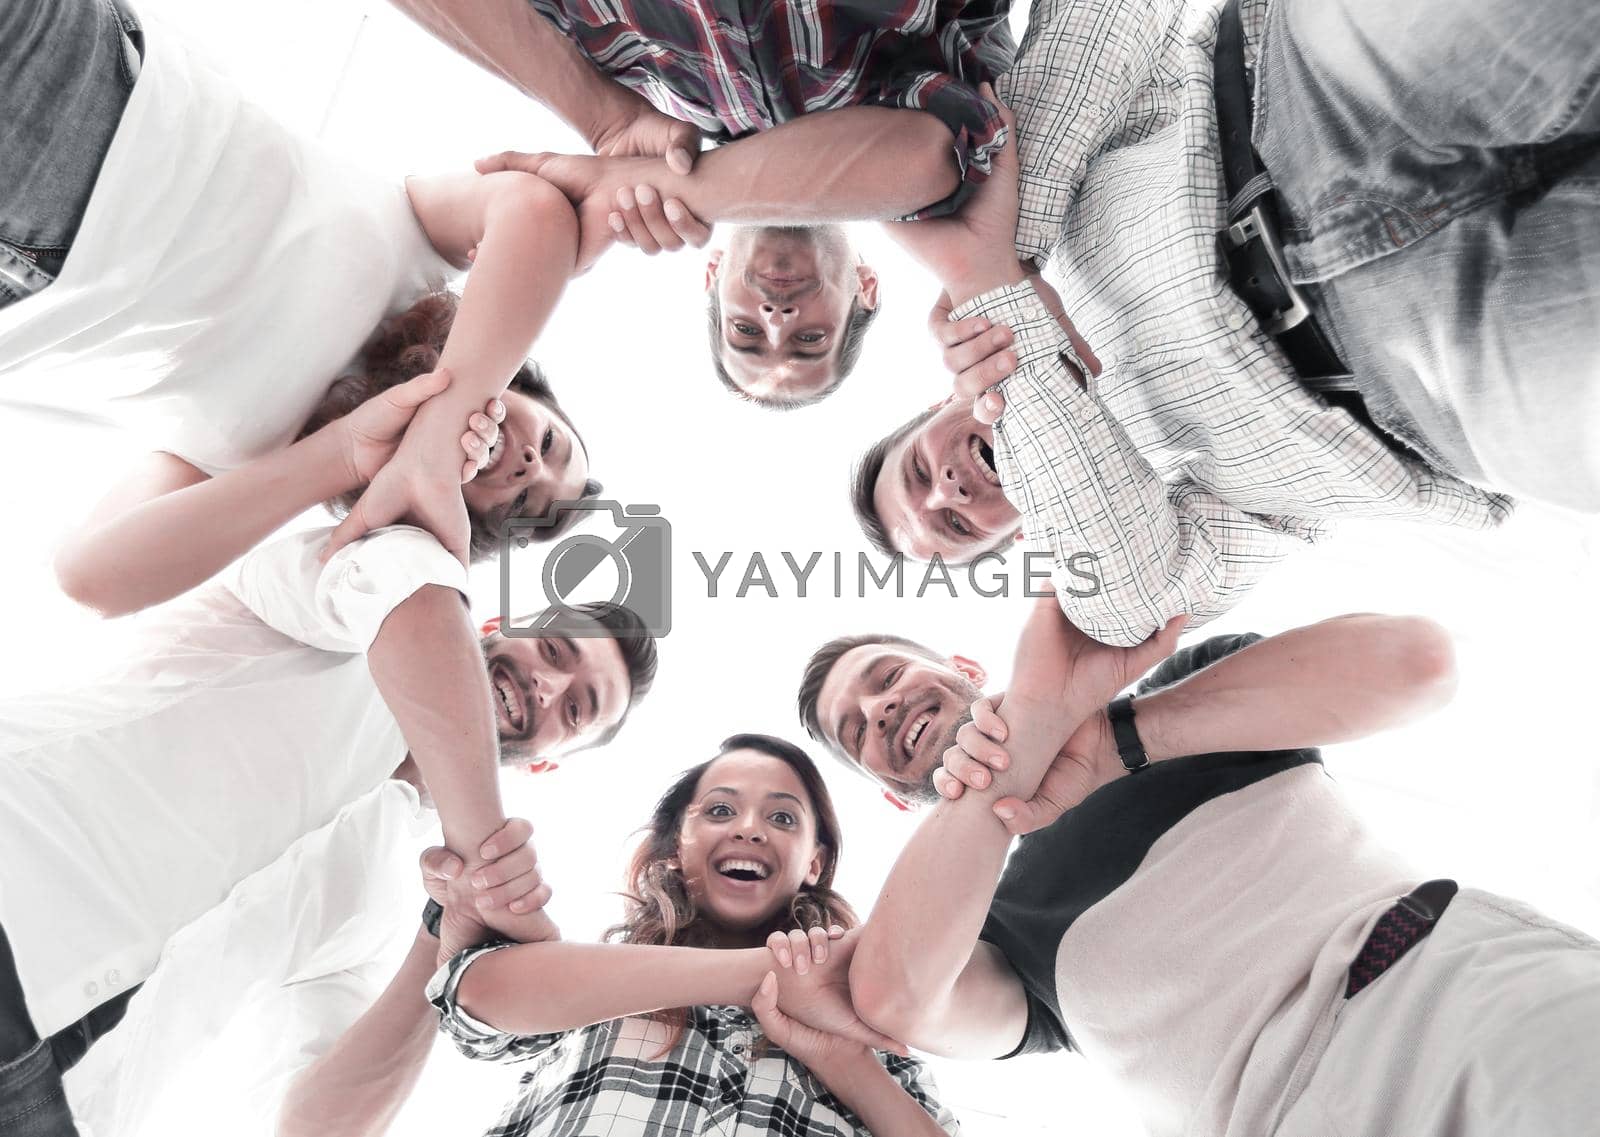 Royalty free image of Happy group of businesspeople stacking their hands in cooperation by asdf